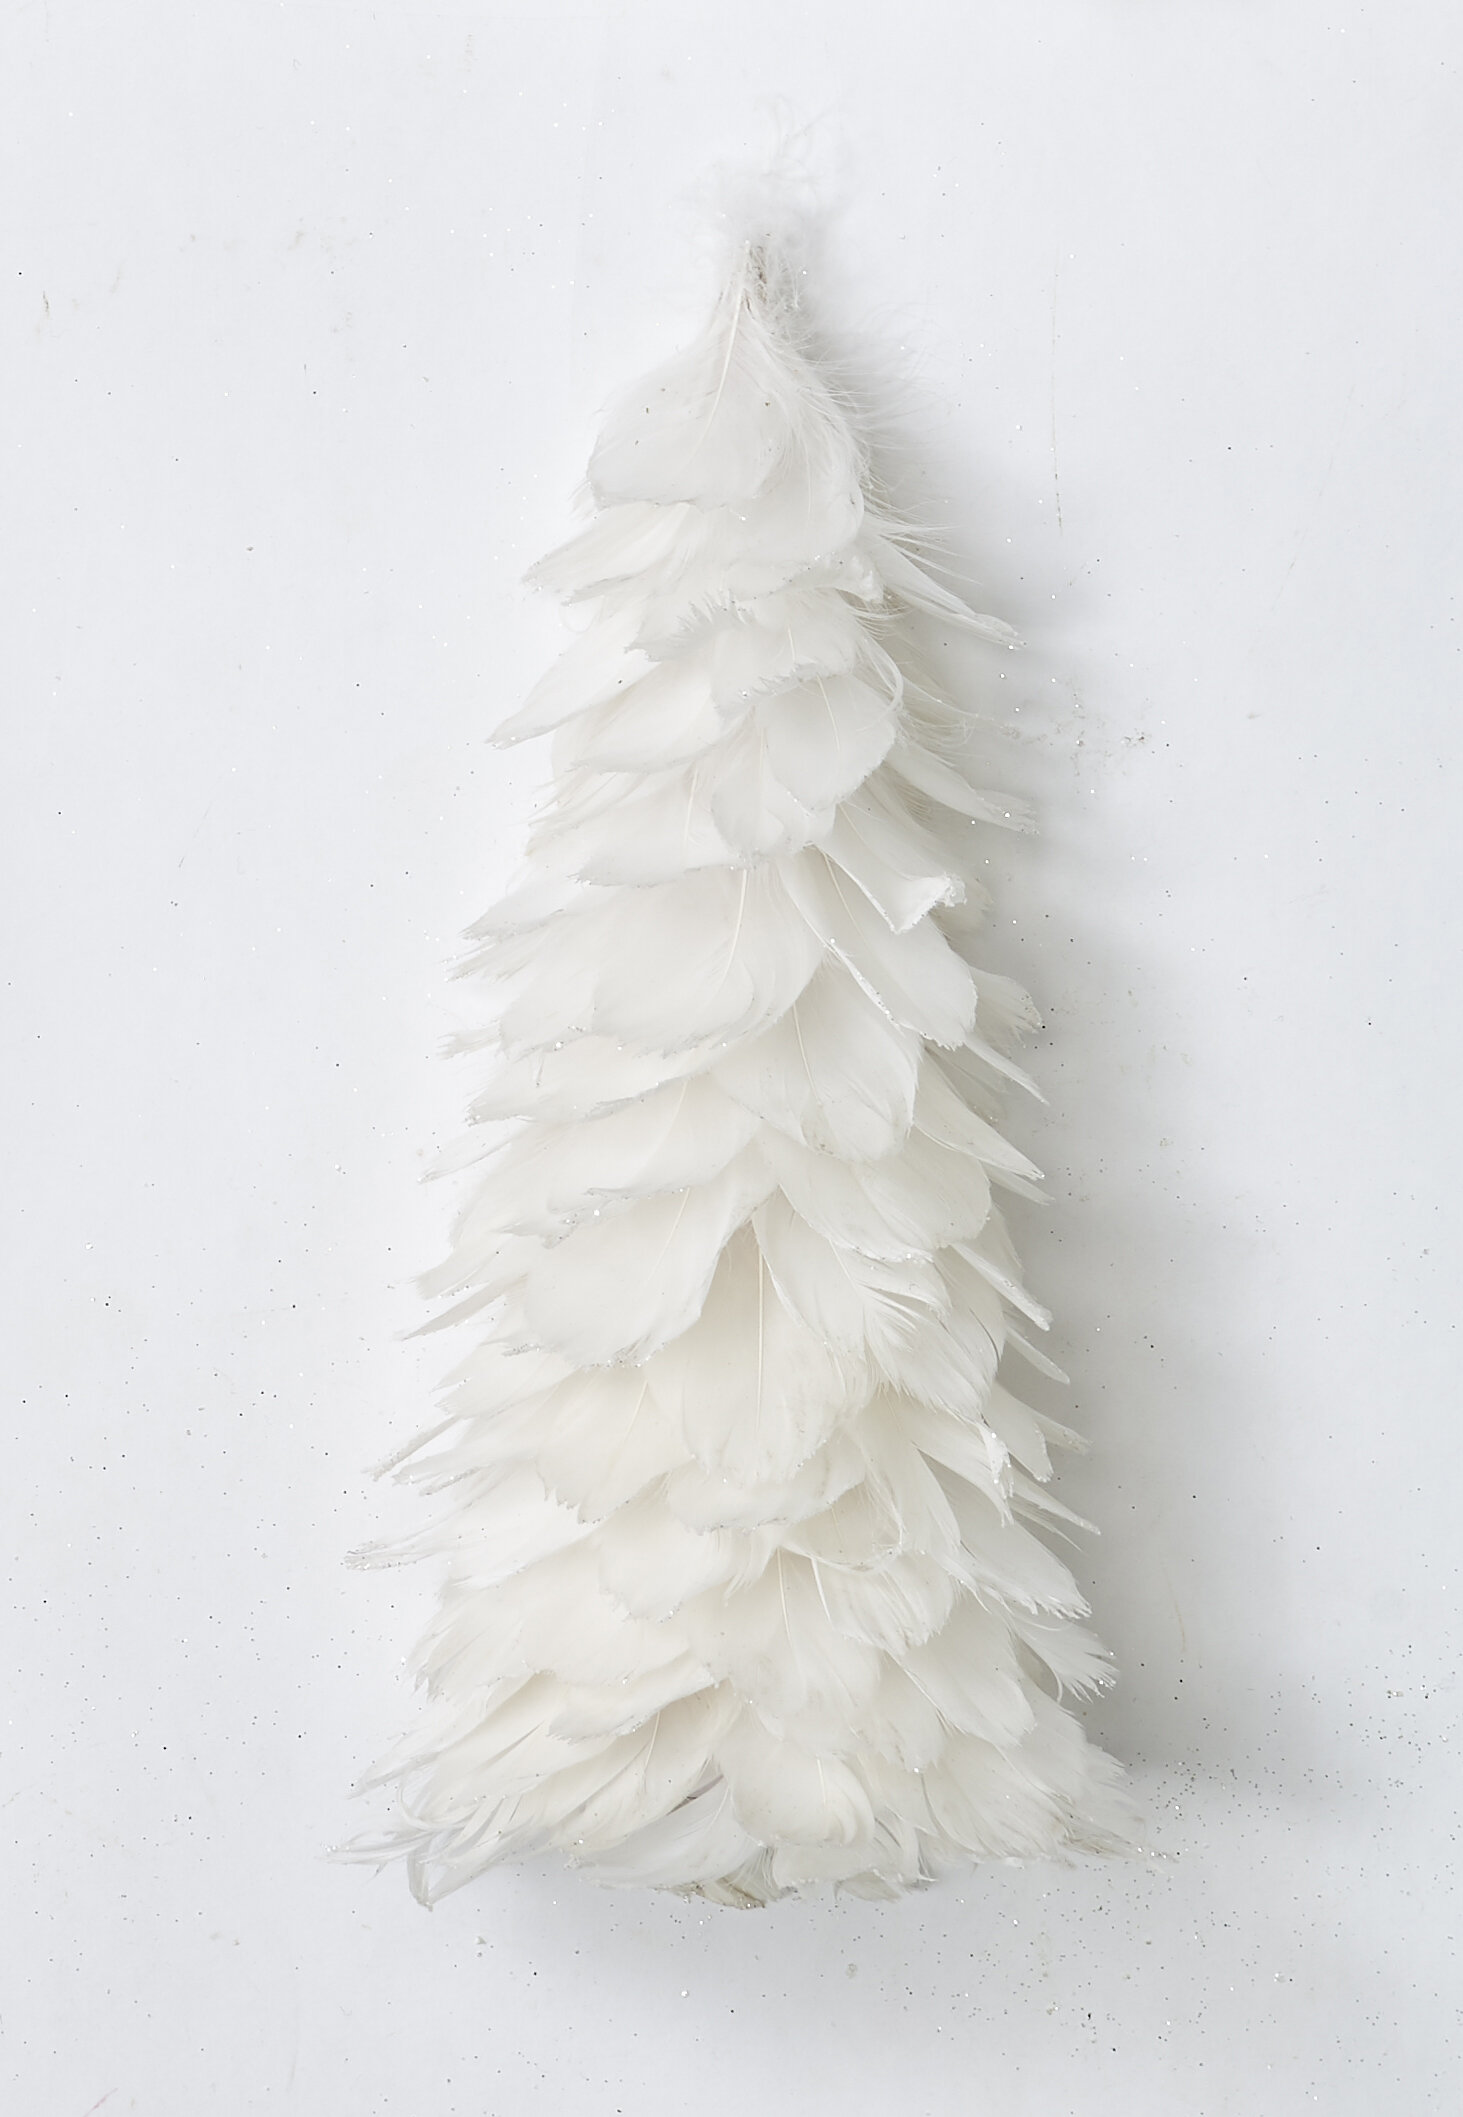 12 Natural Feather Tree Set of 2